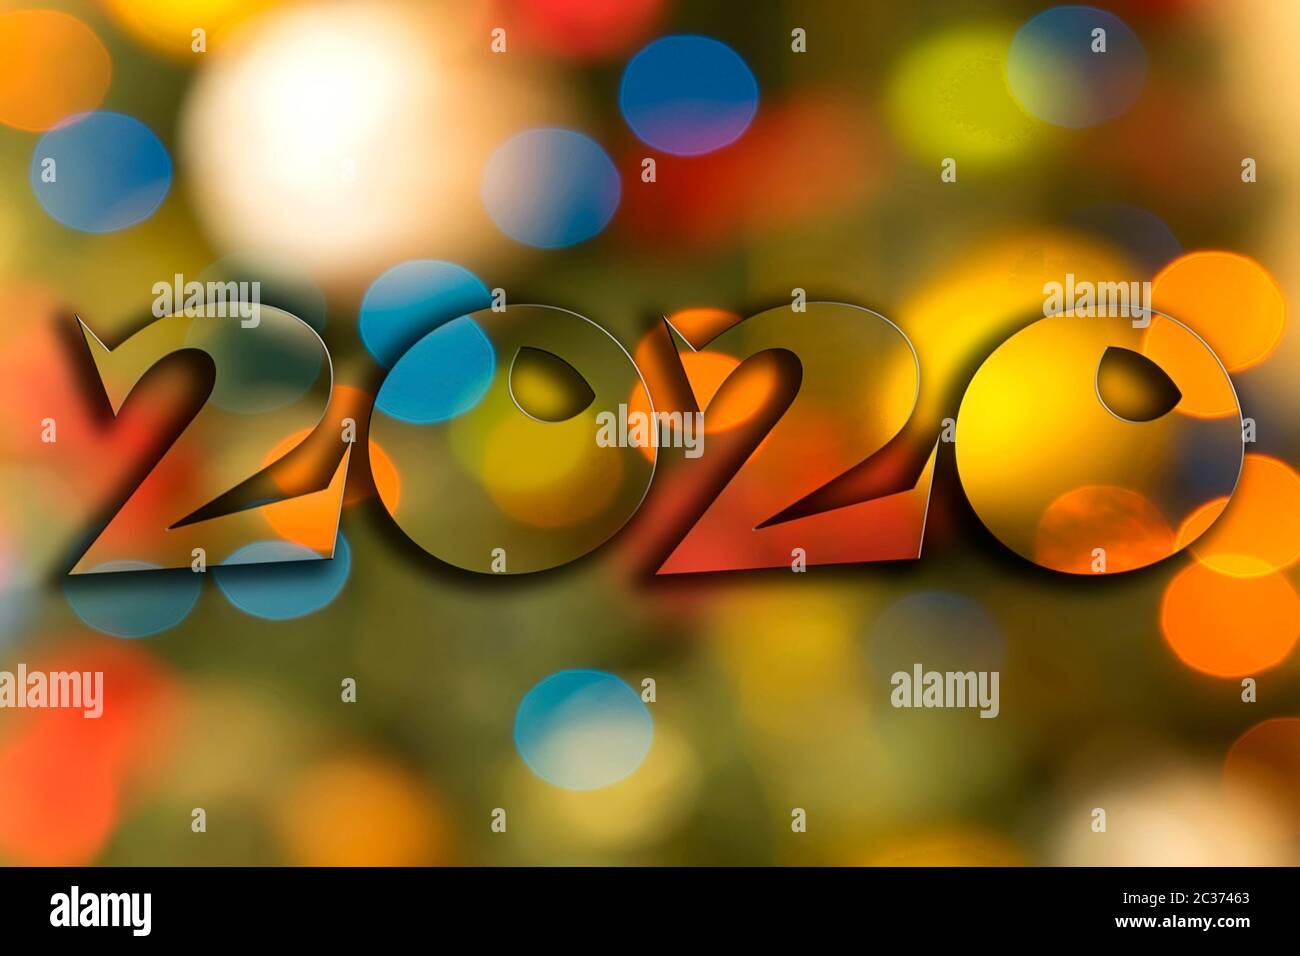 New Year 2020 word on a Christmas background Stock Photo